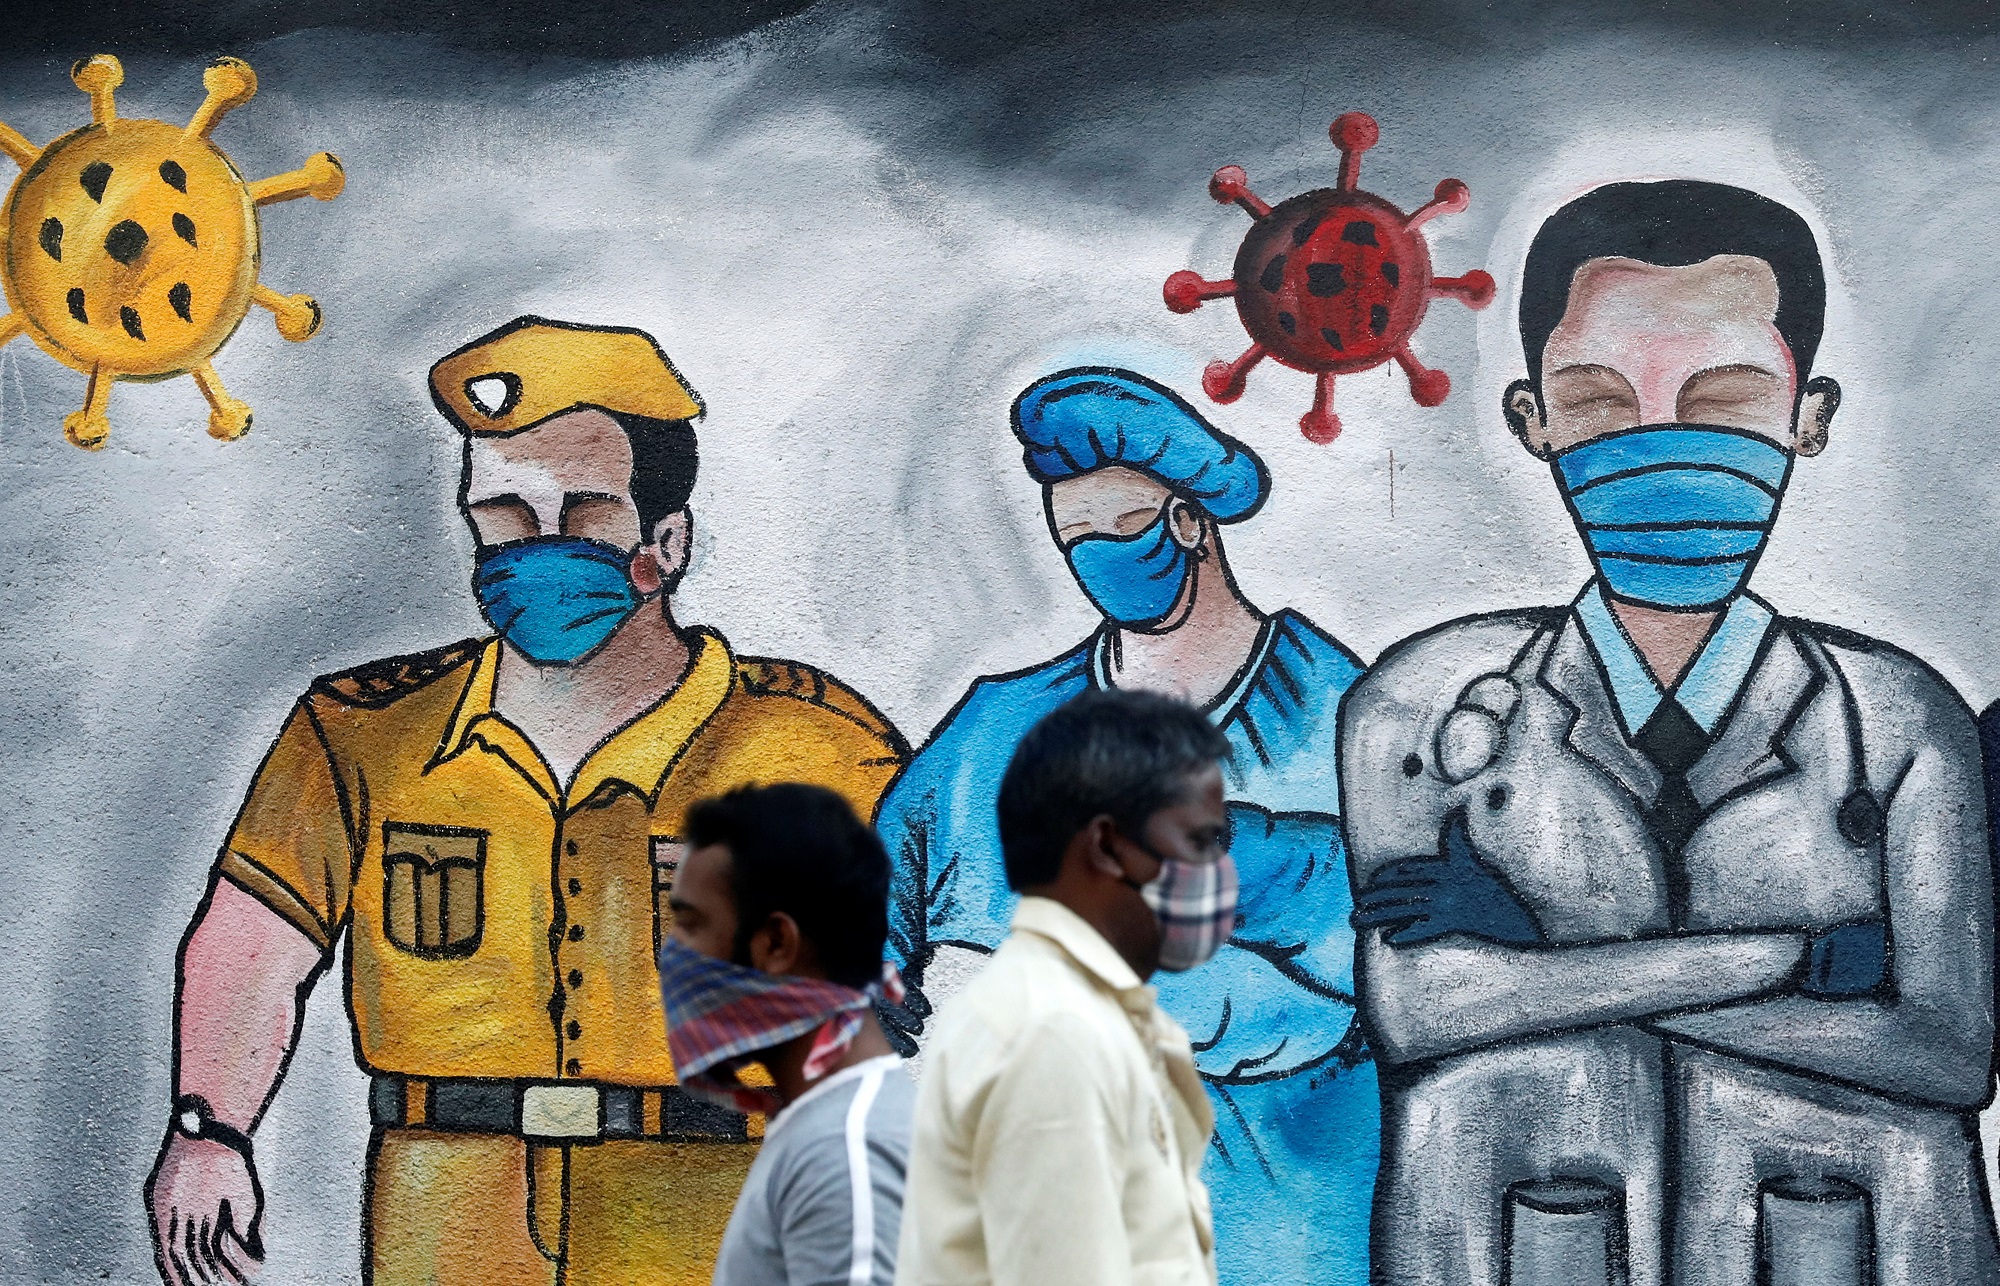 Men walk past a mural of frontline workers amid the spread of the coronavirus disease (COVID-19), in Mumbai on December 21, 2020. (REUTERS)